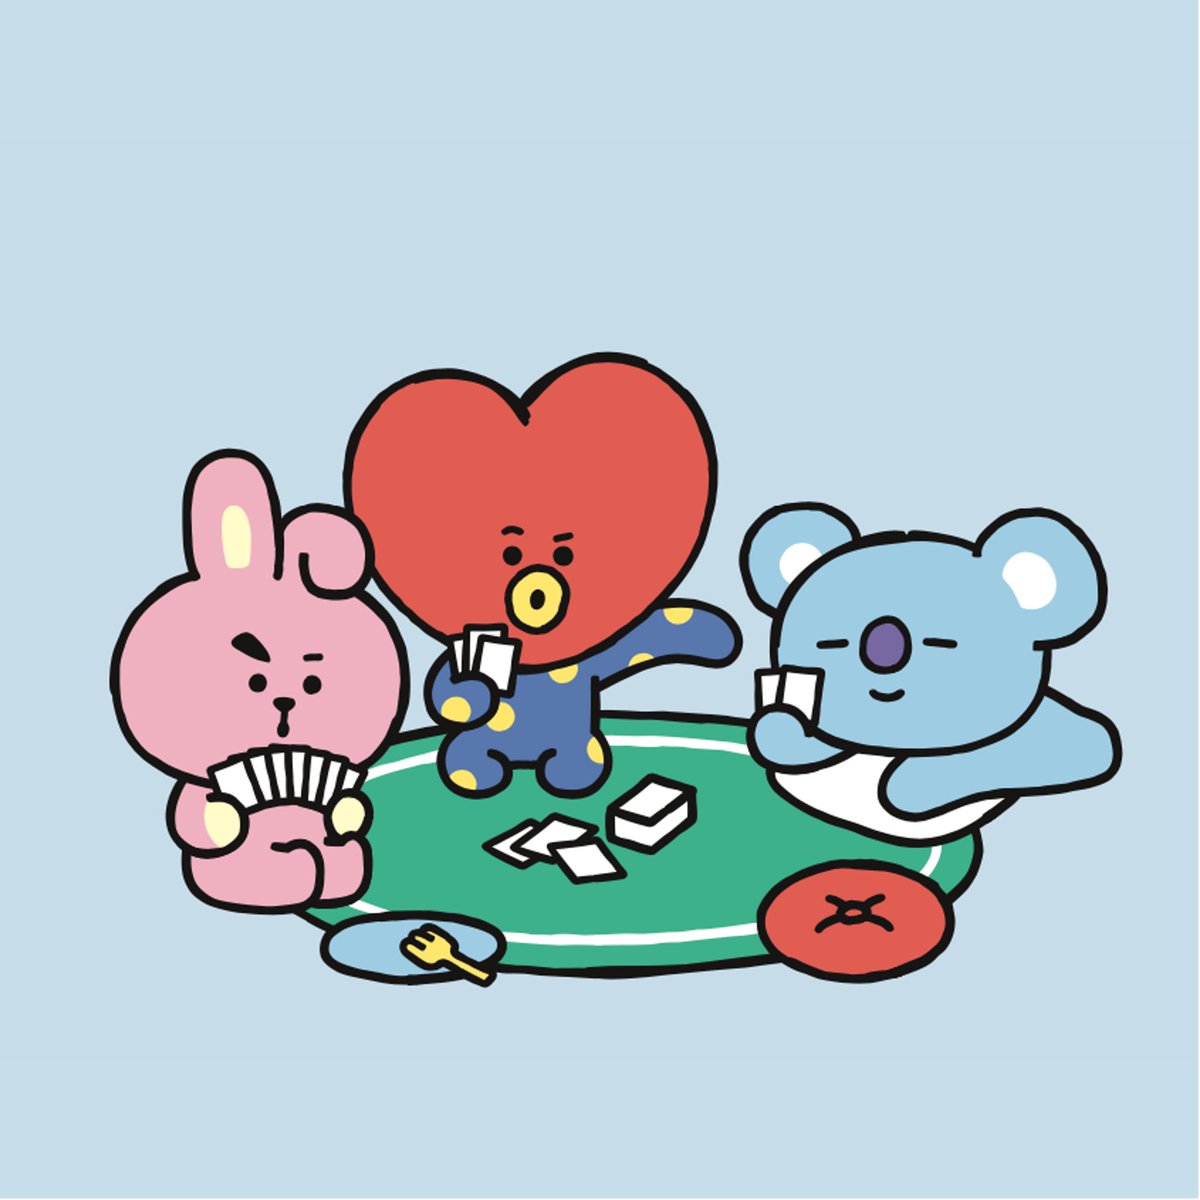 「How do you spend your day off, UNISTARS?」|BT21のイラスト